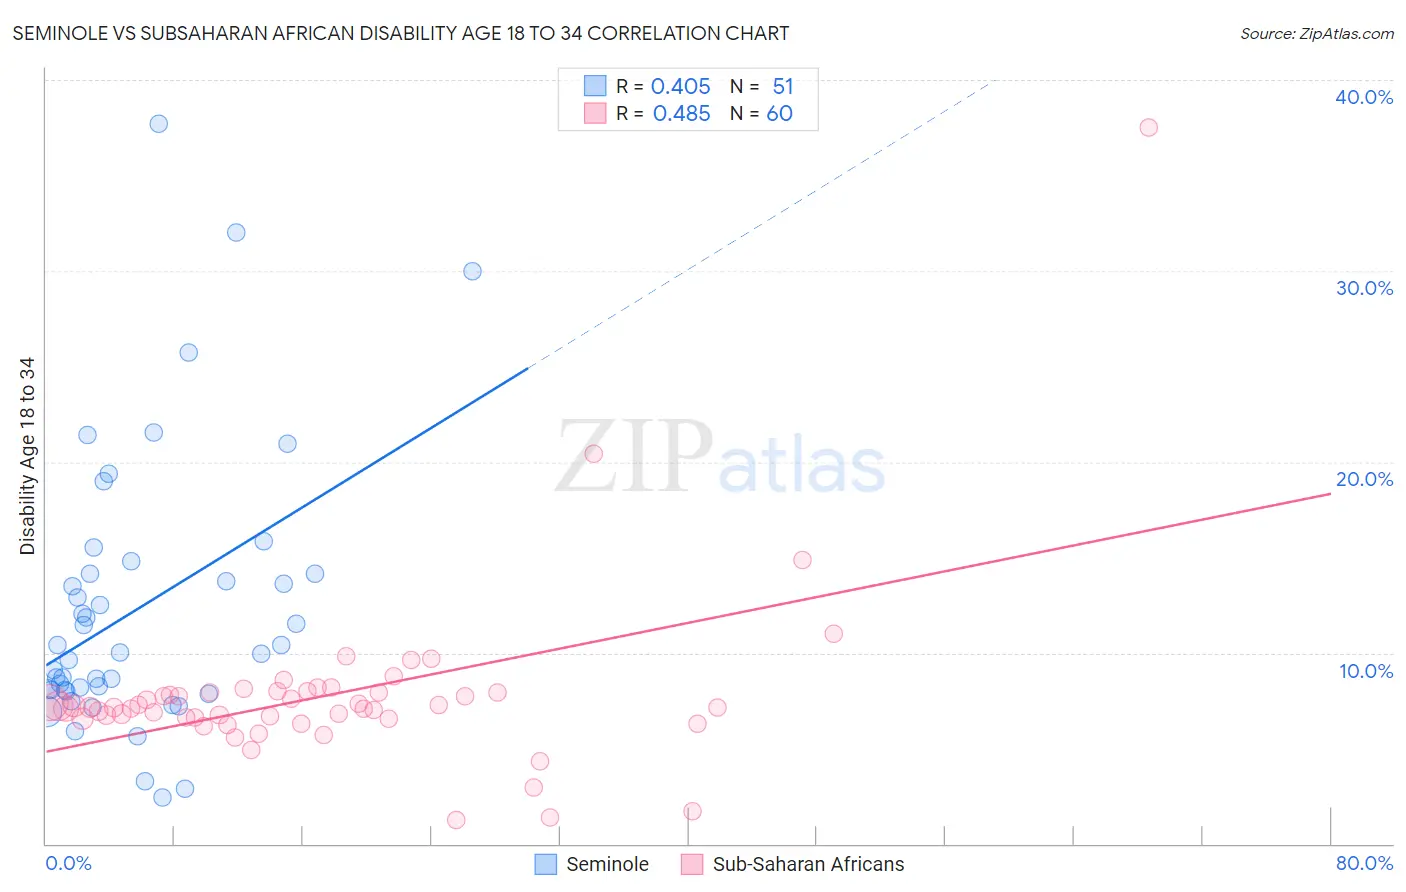 Seminole vs Subsaharan African Disability Age 18 to 34